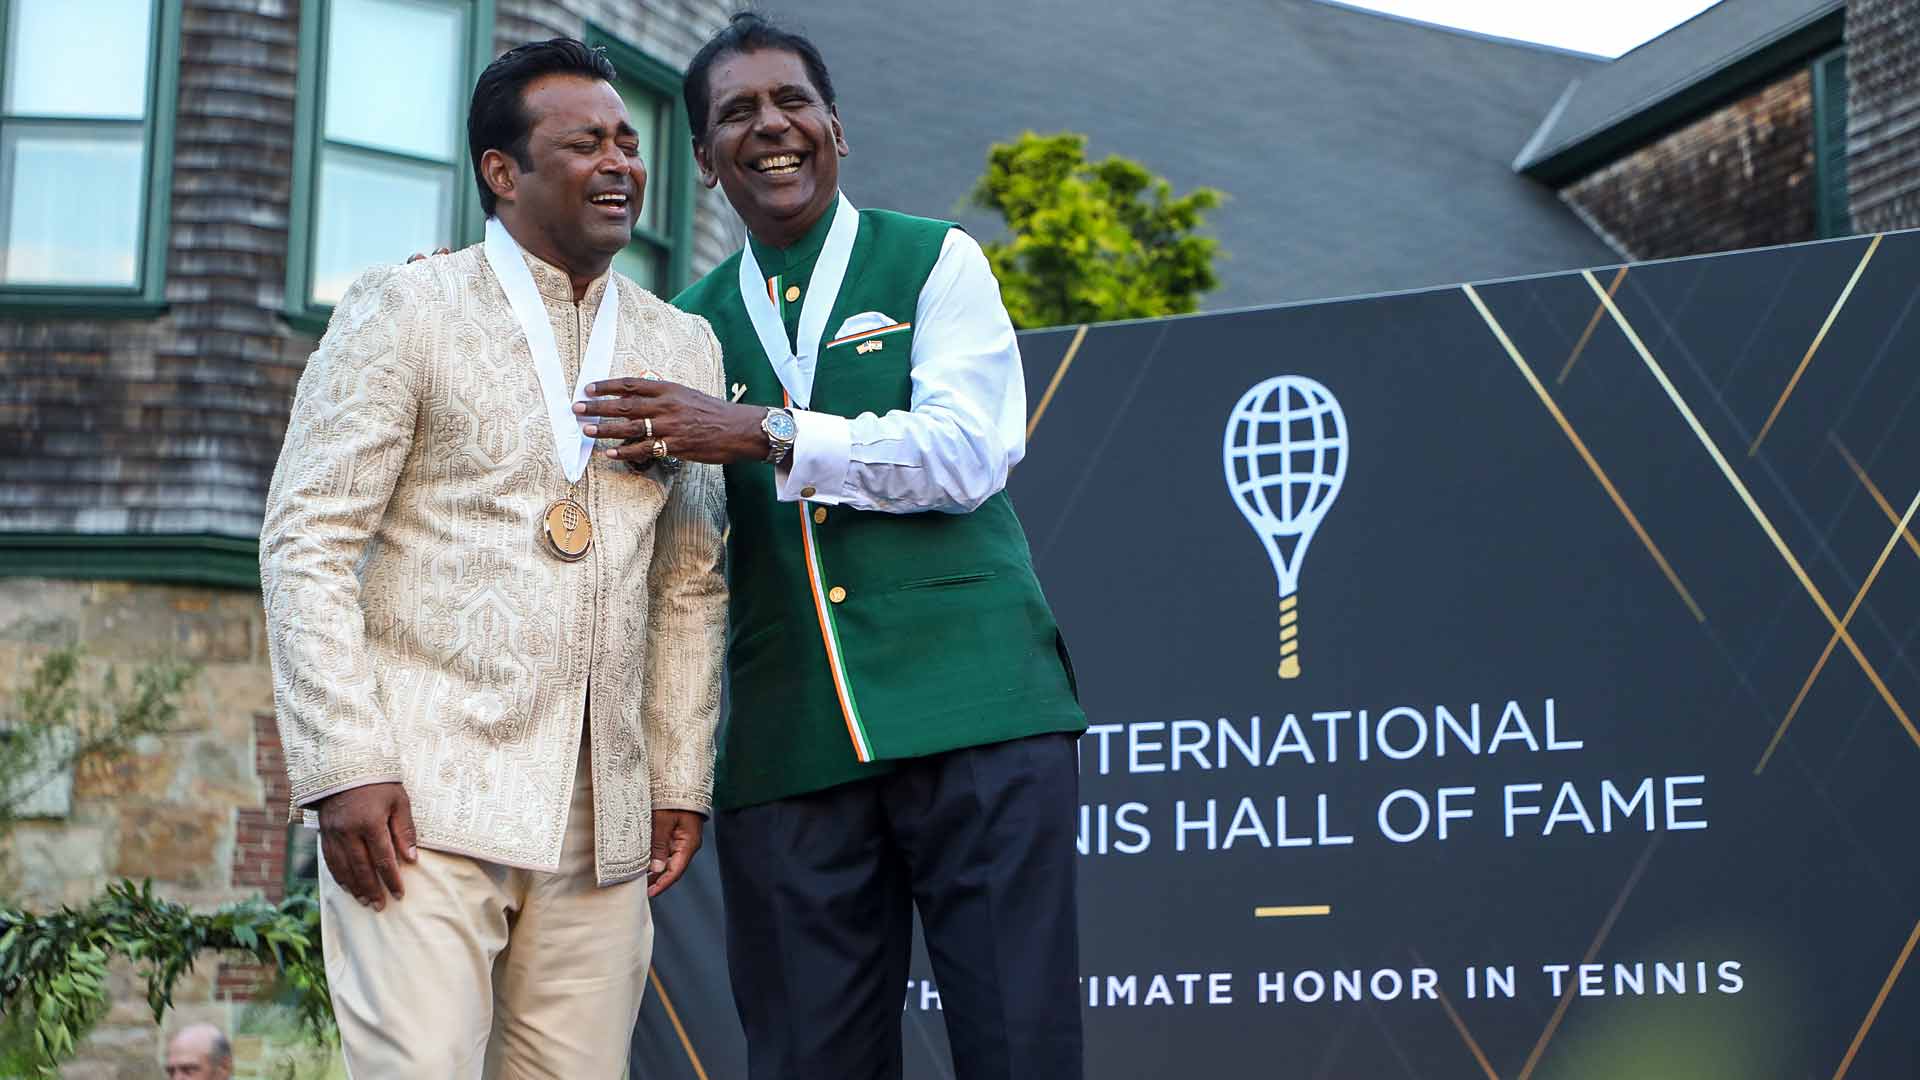 Leander Paes and Vijay Amritraj share a laugh following their induction into the International Tennis Hall of Fame.